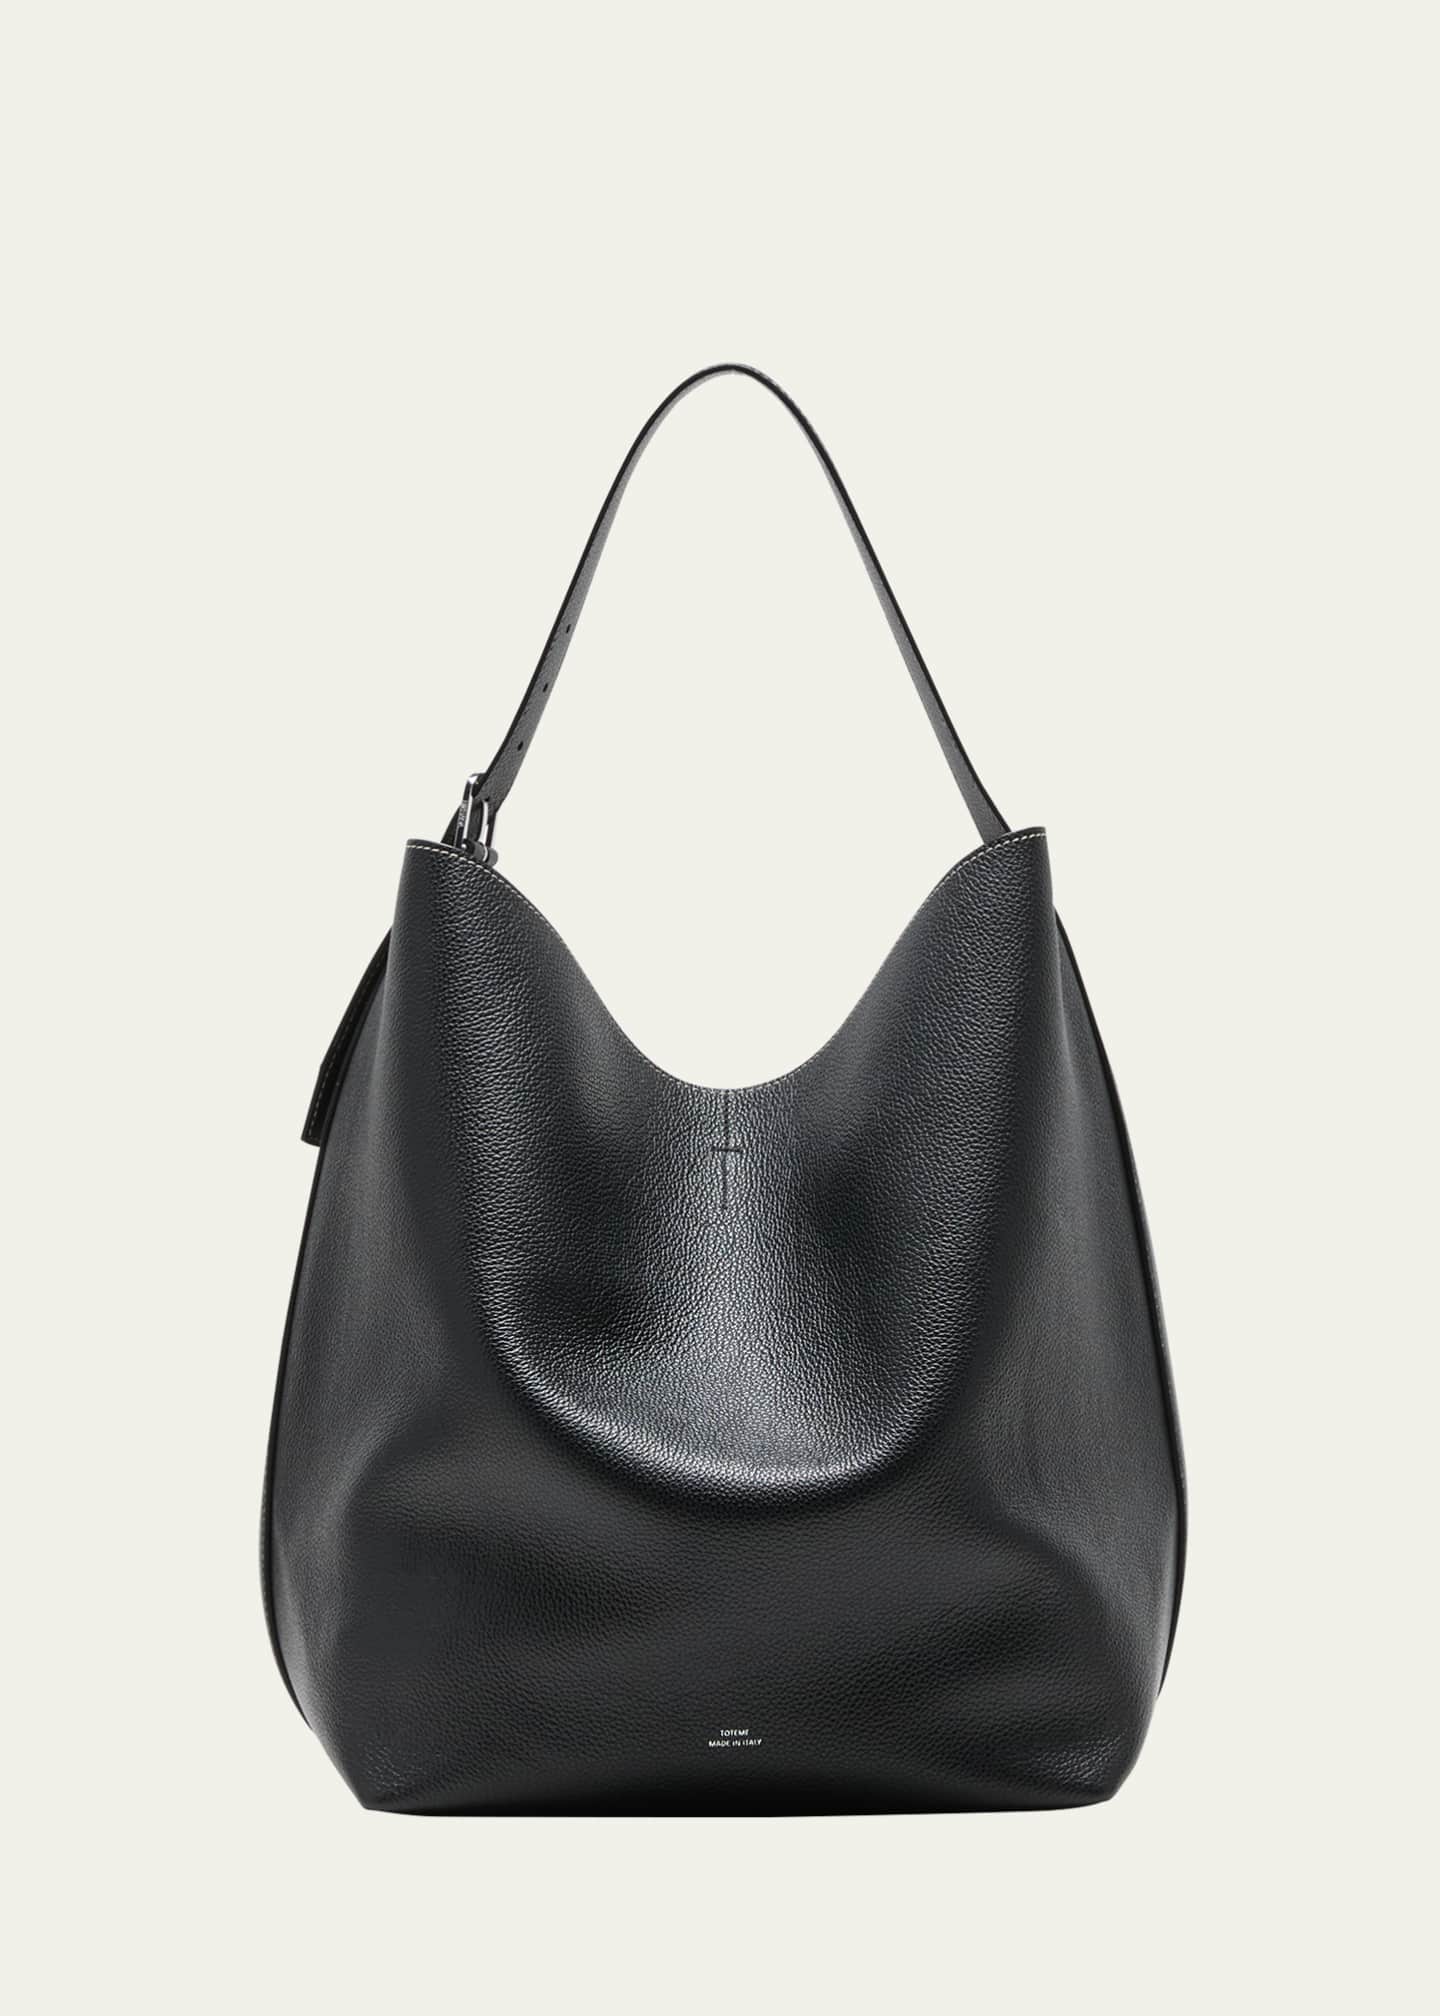 Toteme Belted Leather Tote Bag - Bergdorf Goodman